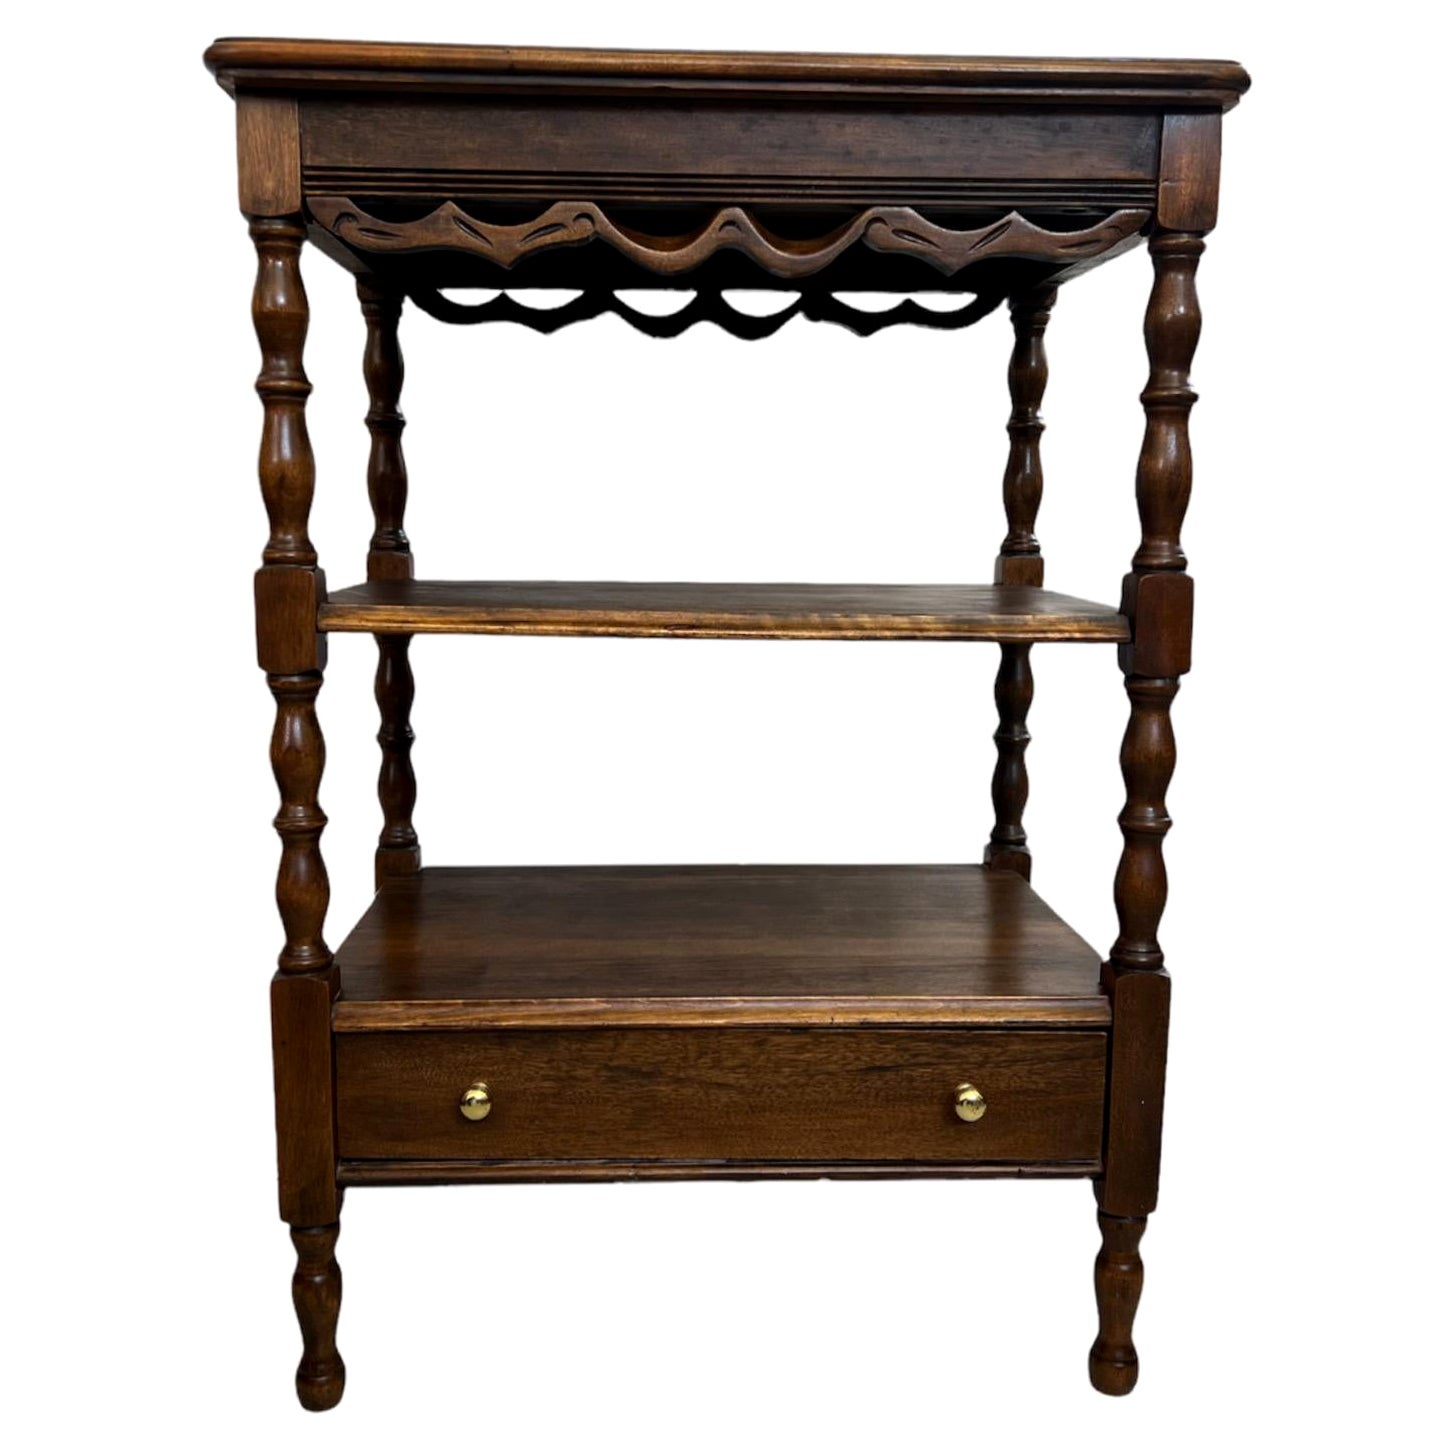 Vintage English Mahogany Side Table with Dovetailed Drawers